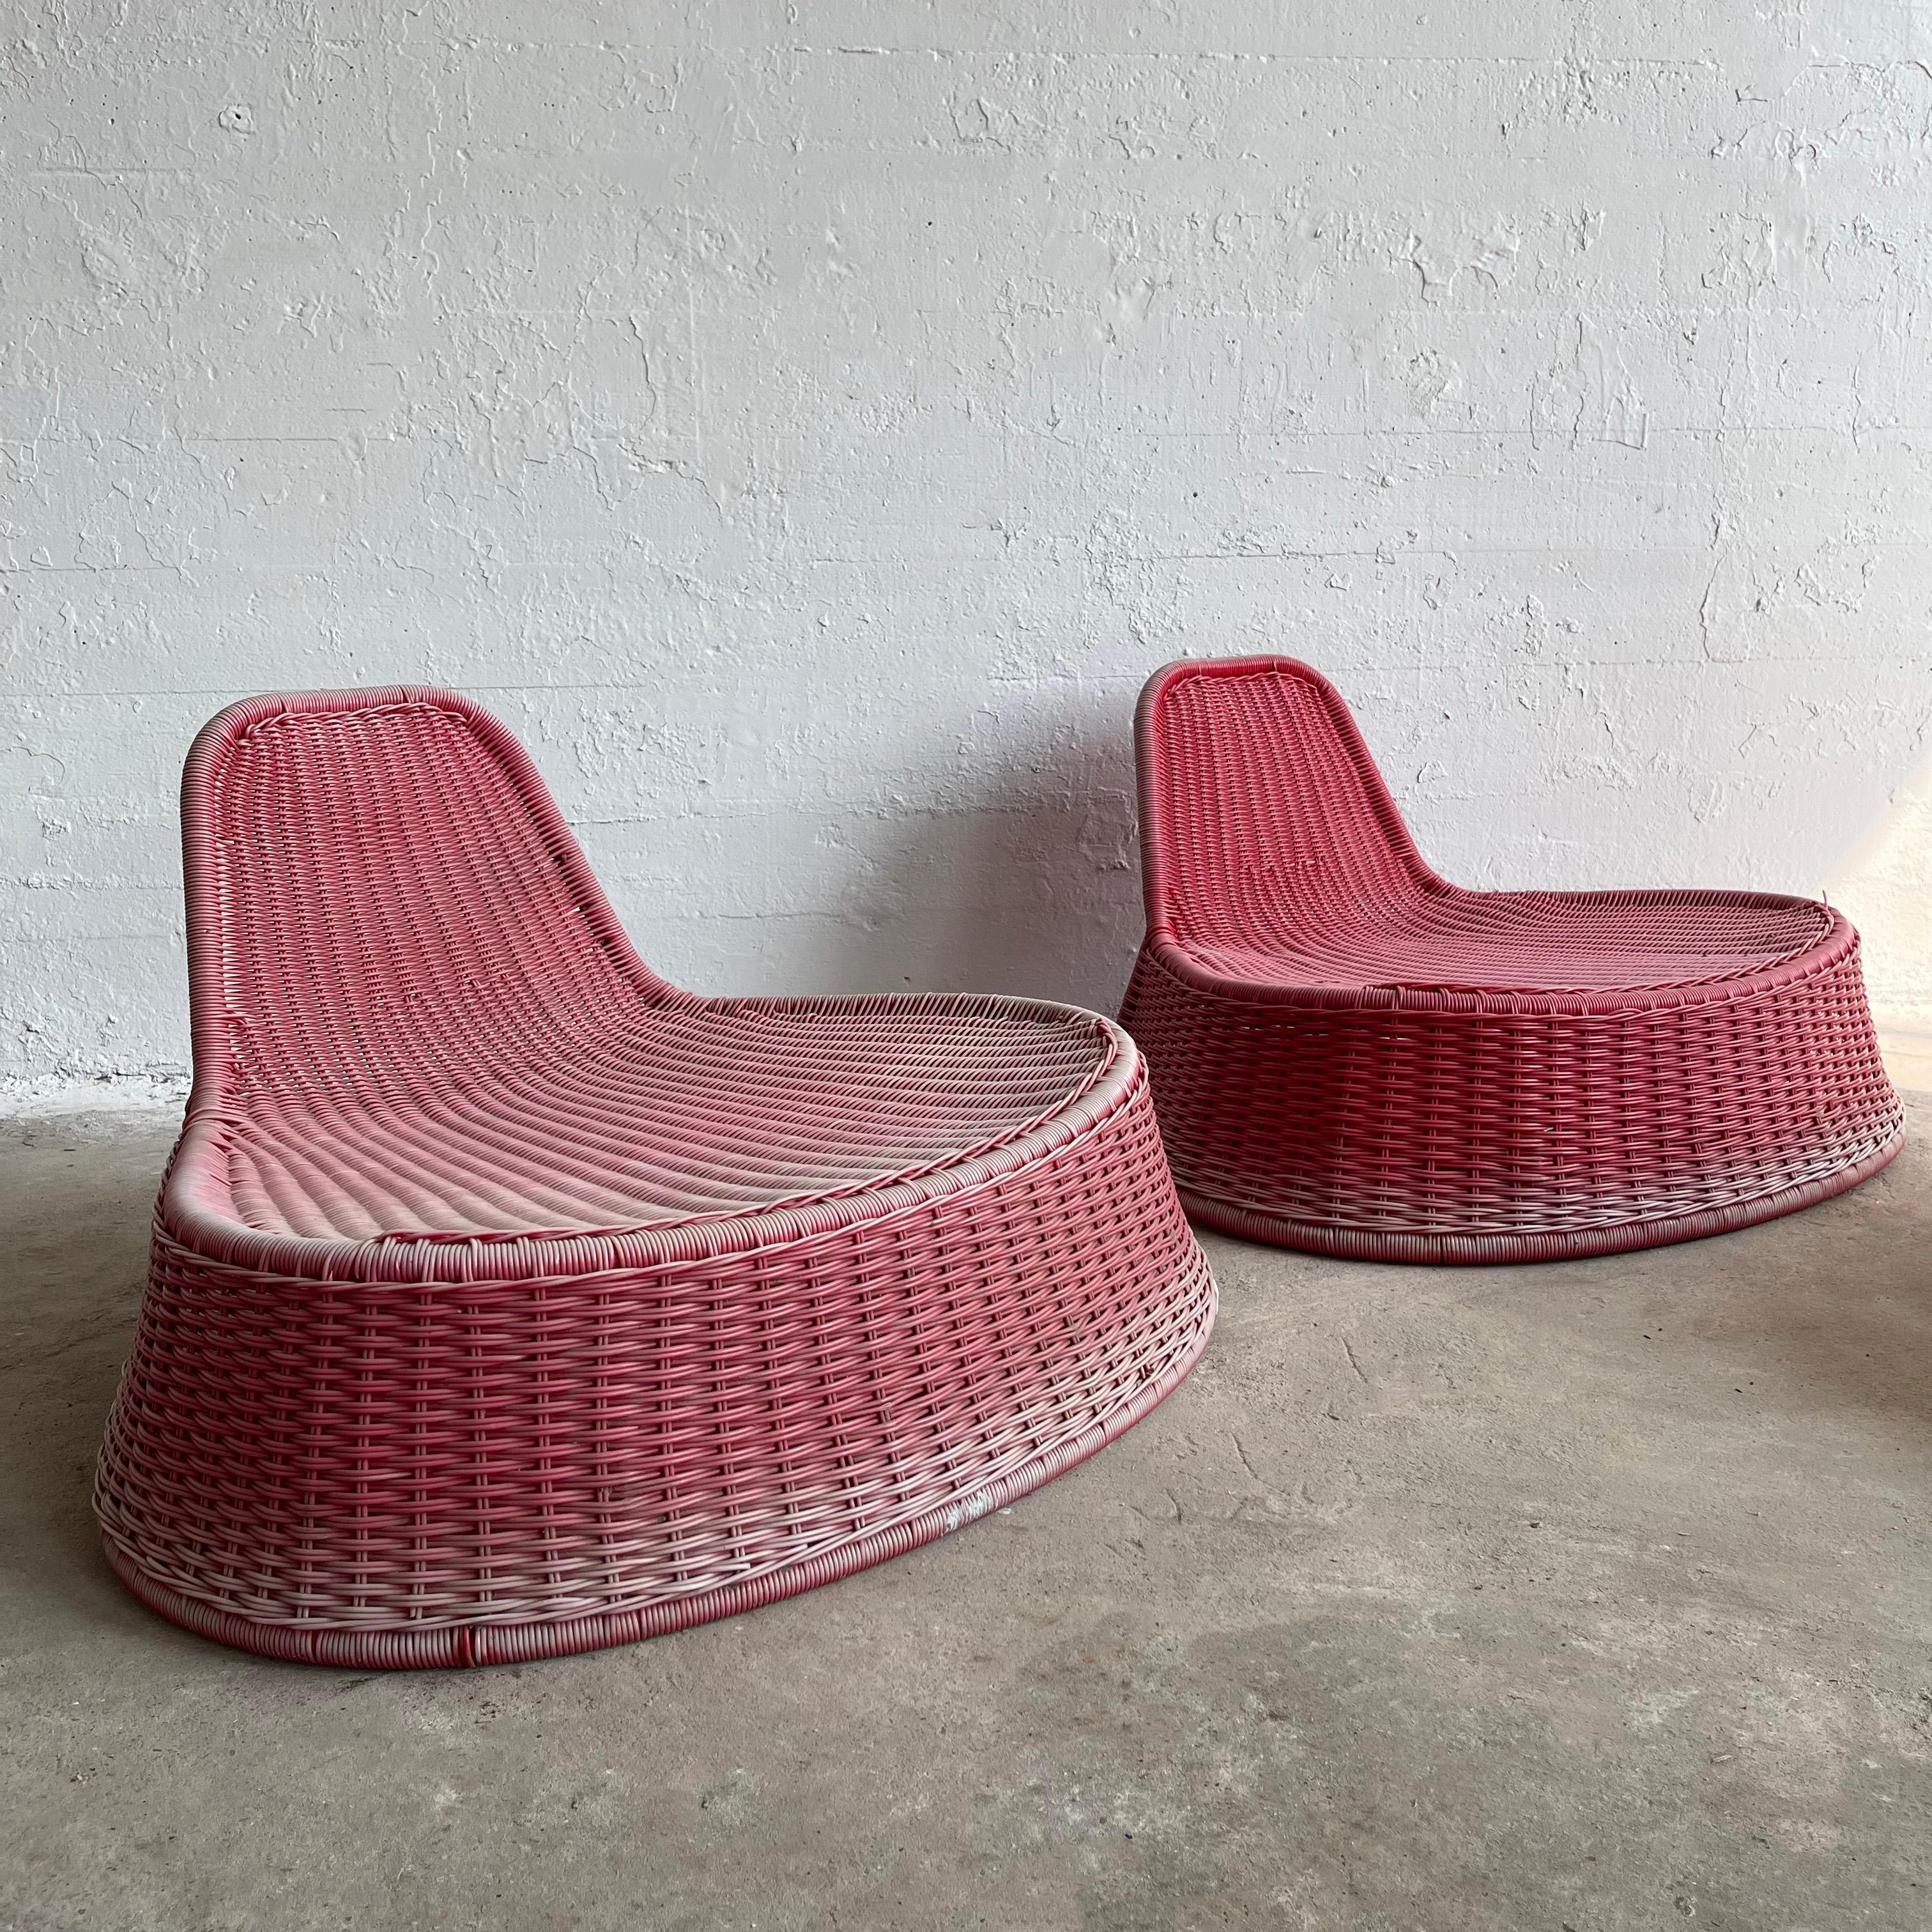 Pink Woven Outdoor Lounge Chairs By Monika Mulder For Ikea In Good Condition For Sale In Brooklyn, NY